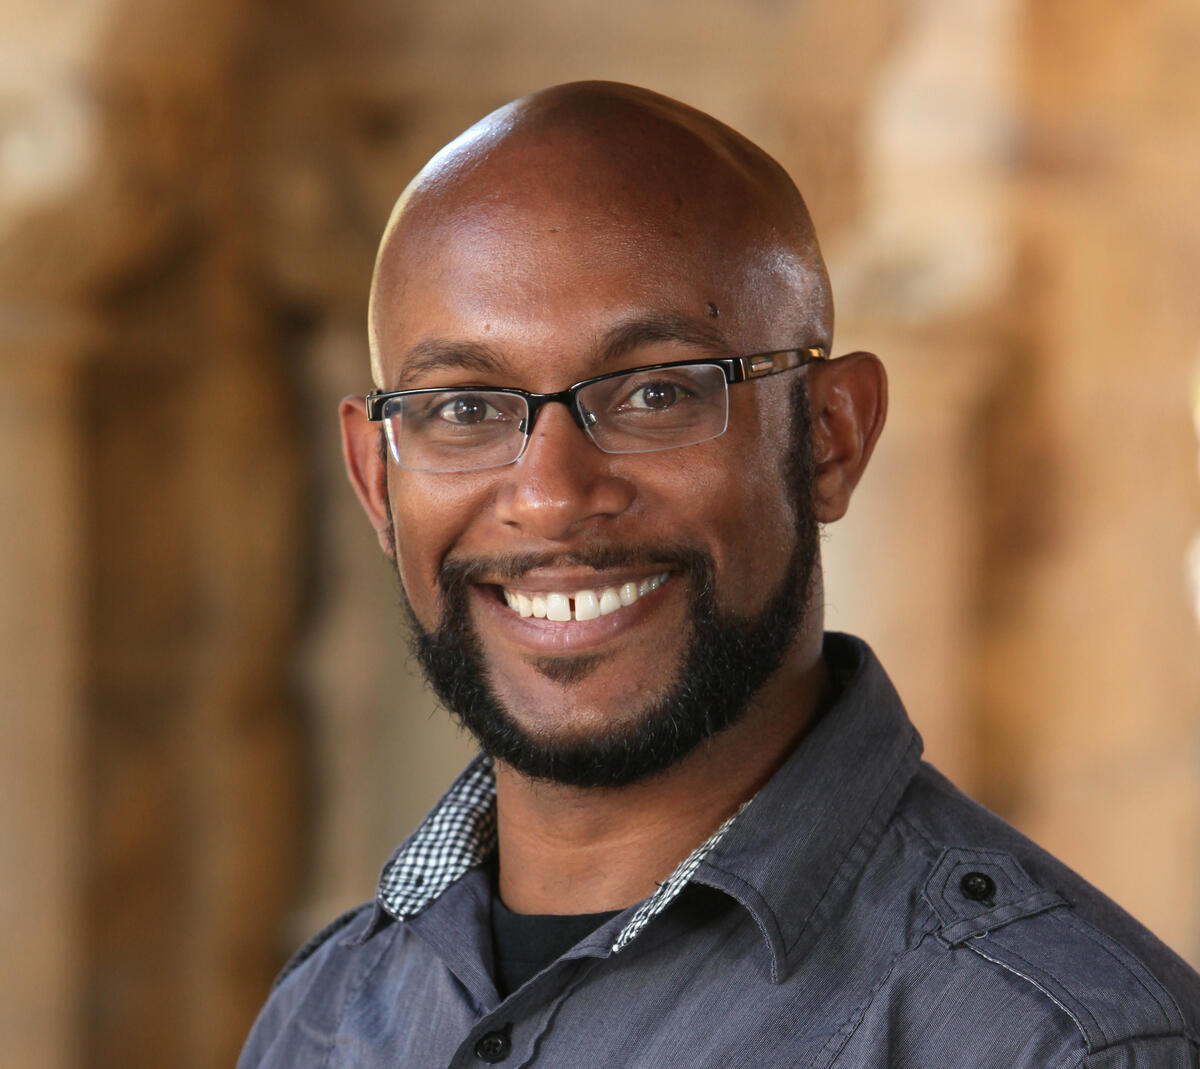 Smiling bald Black male educator with a beard and glasses